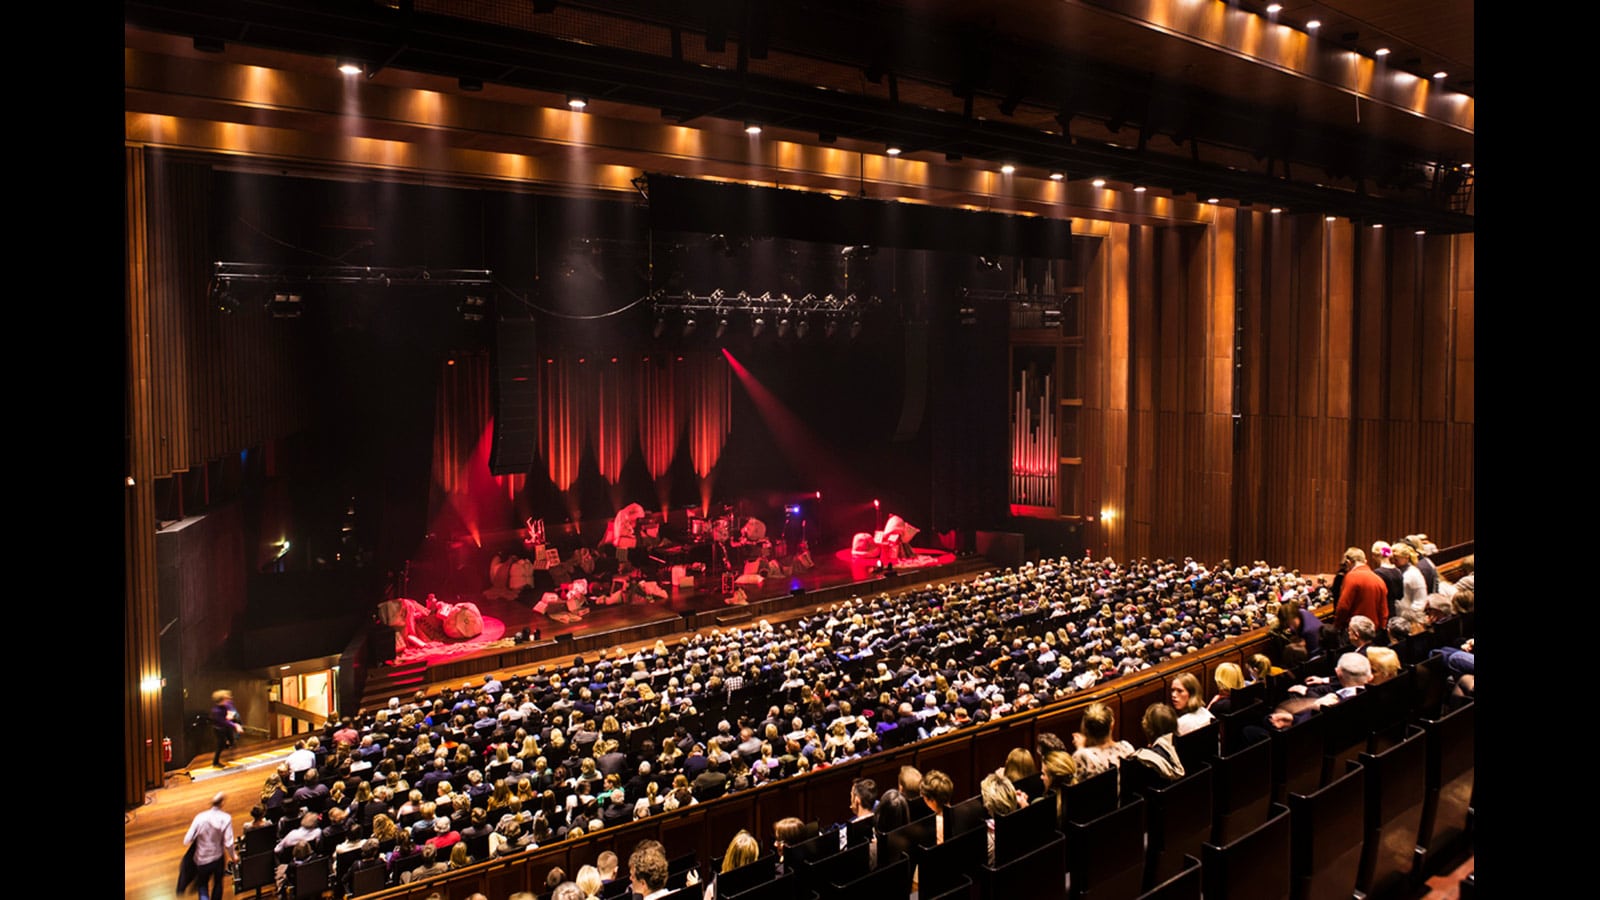 Oslo Concert Hall Upgrades 27-Year-Old Meyer Sound System to MICA